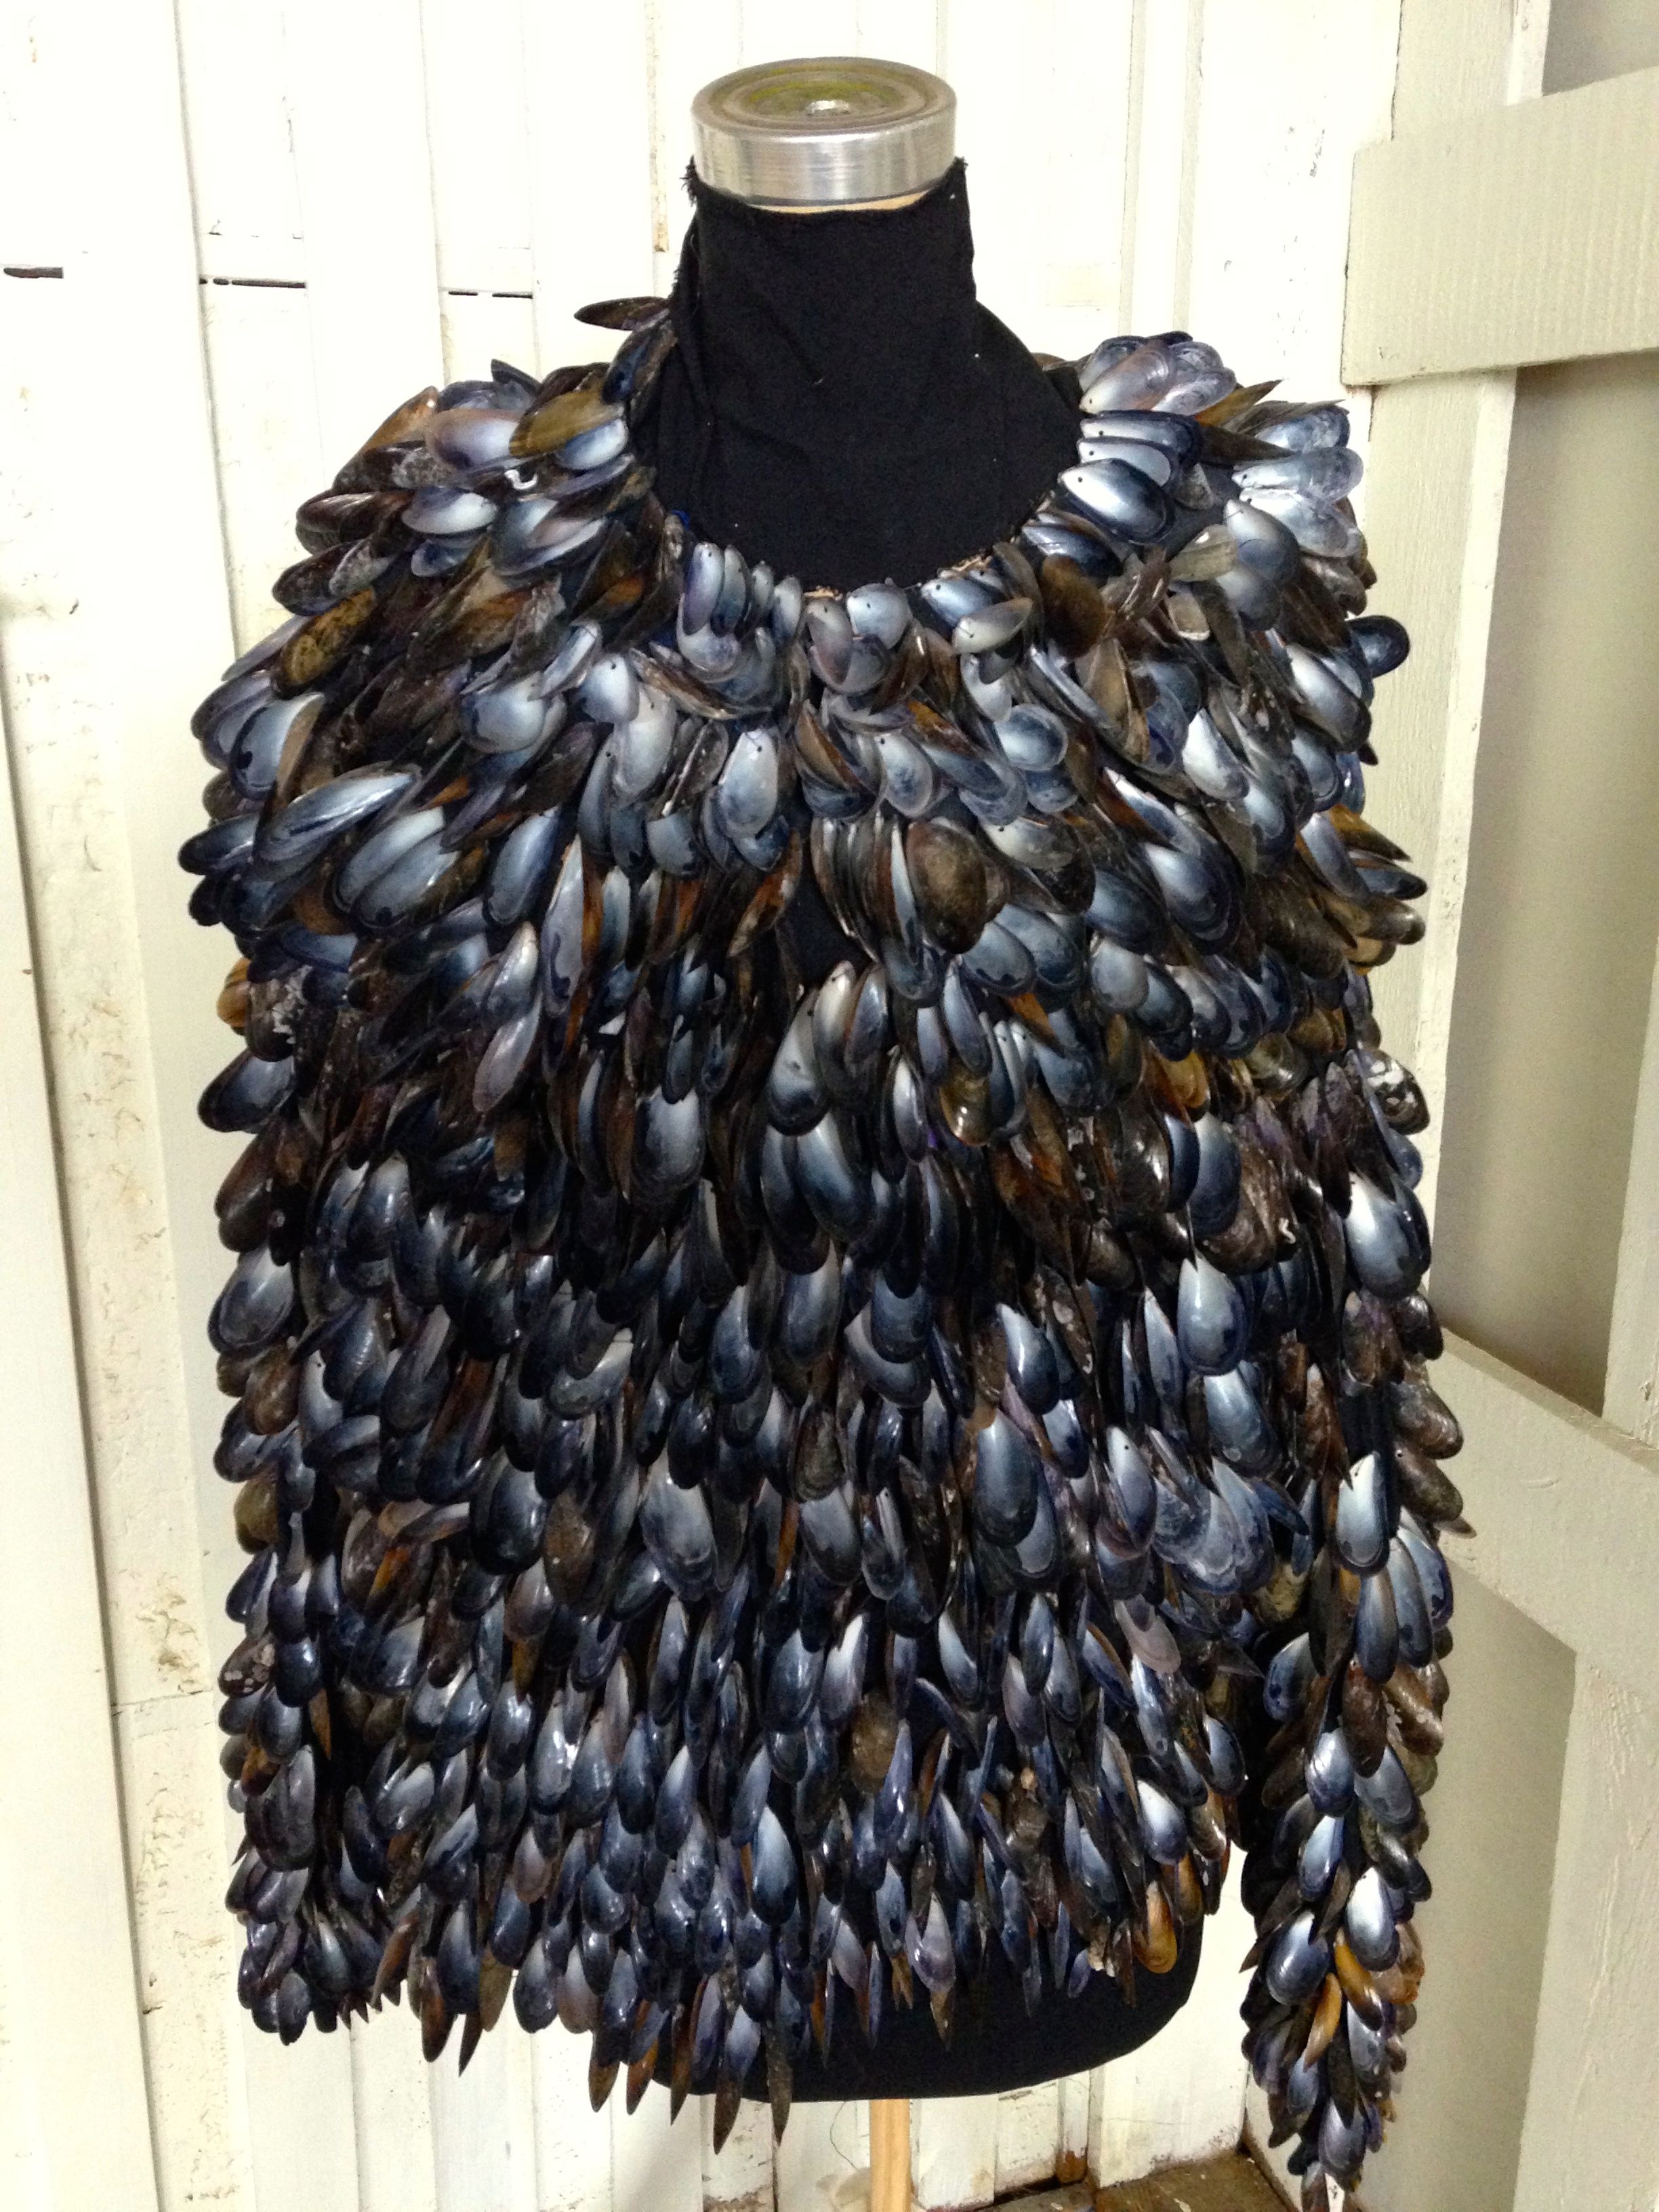 "Mussel shirt" made by artists in Husavik, Iceland.